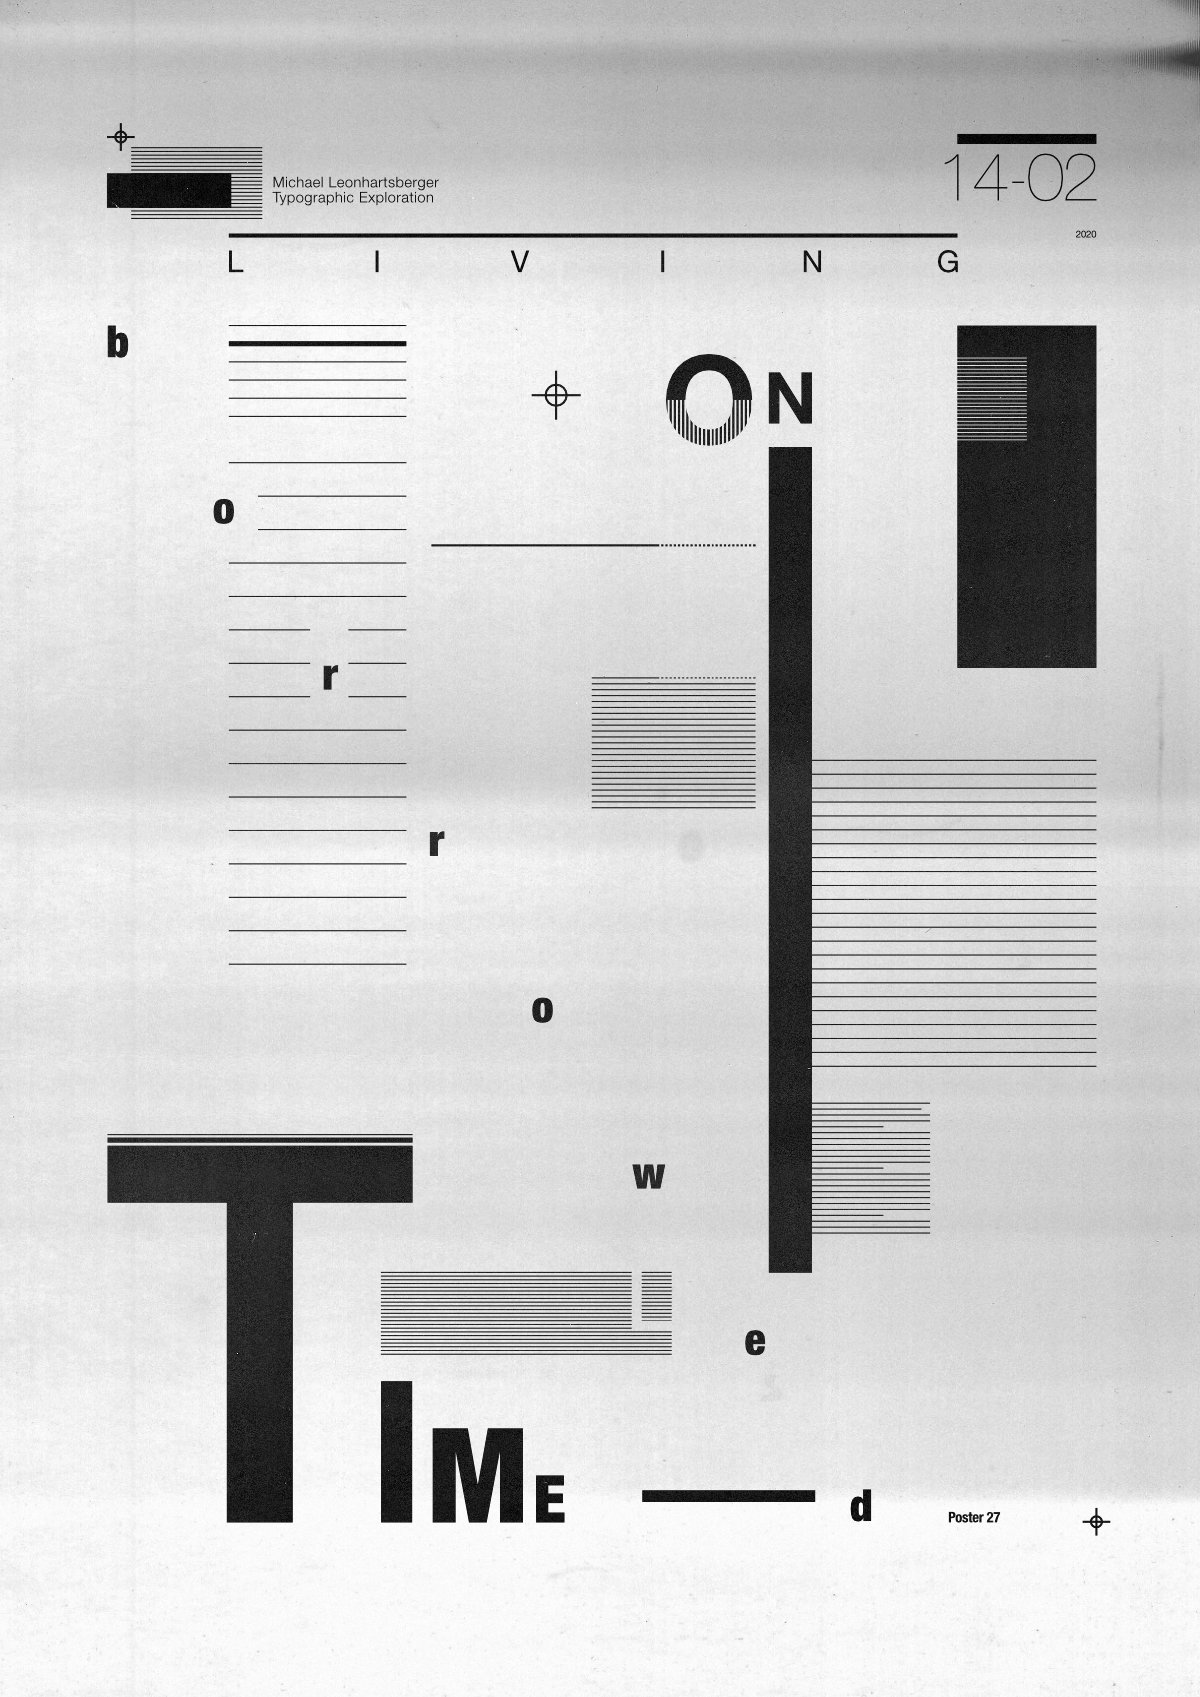 Living on borrowed time – Typographic Poster by Michael Leonhartsberger